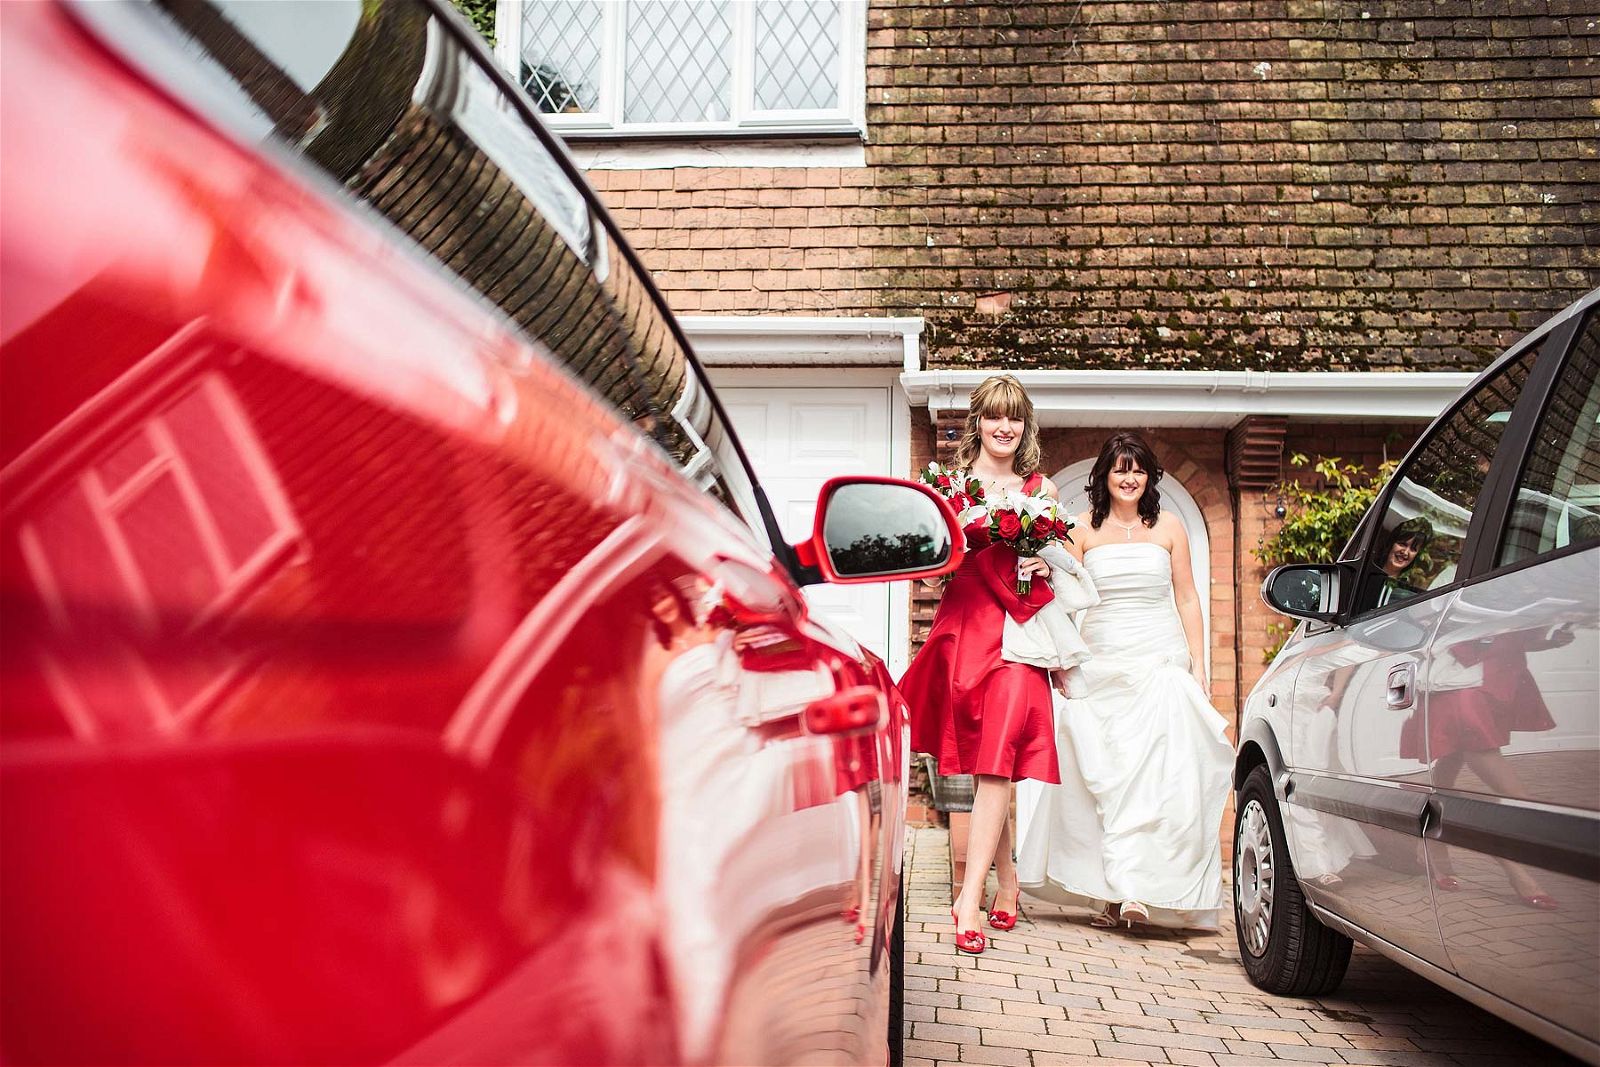 Storytelling documentary wedding photography at The Lion Hotel in Brewood by Documentary Wedding Photographer Stuart James